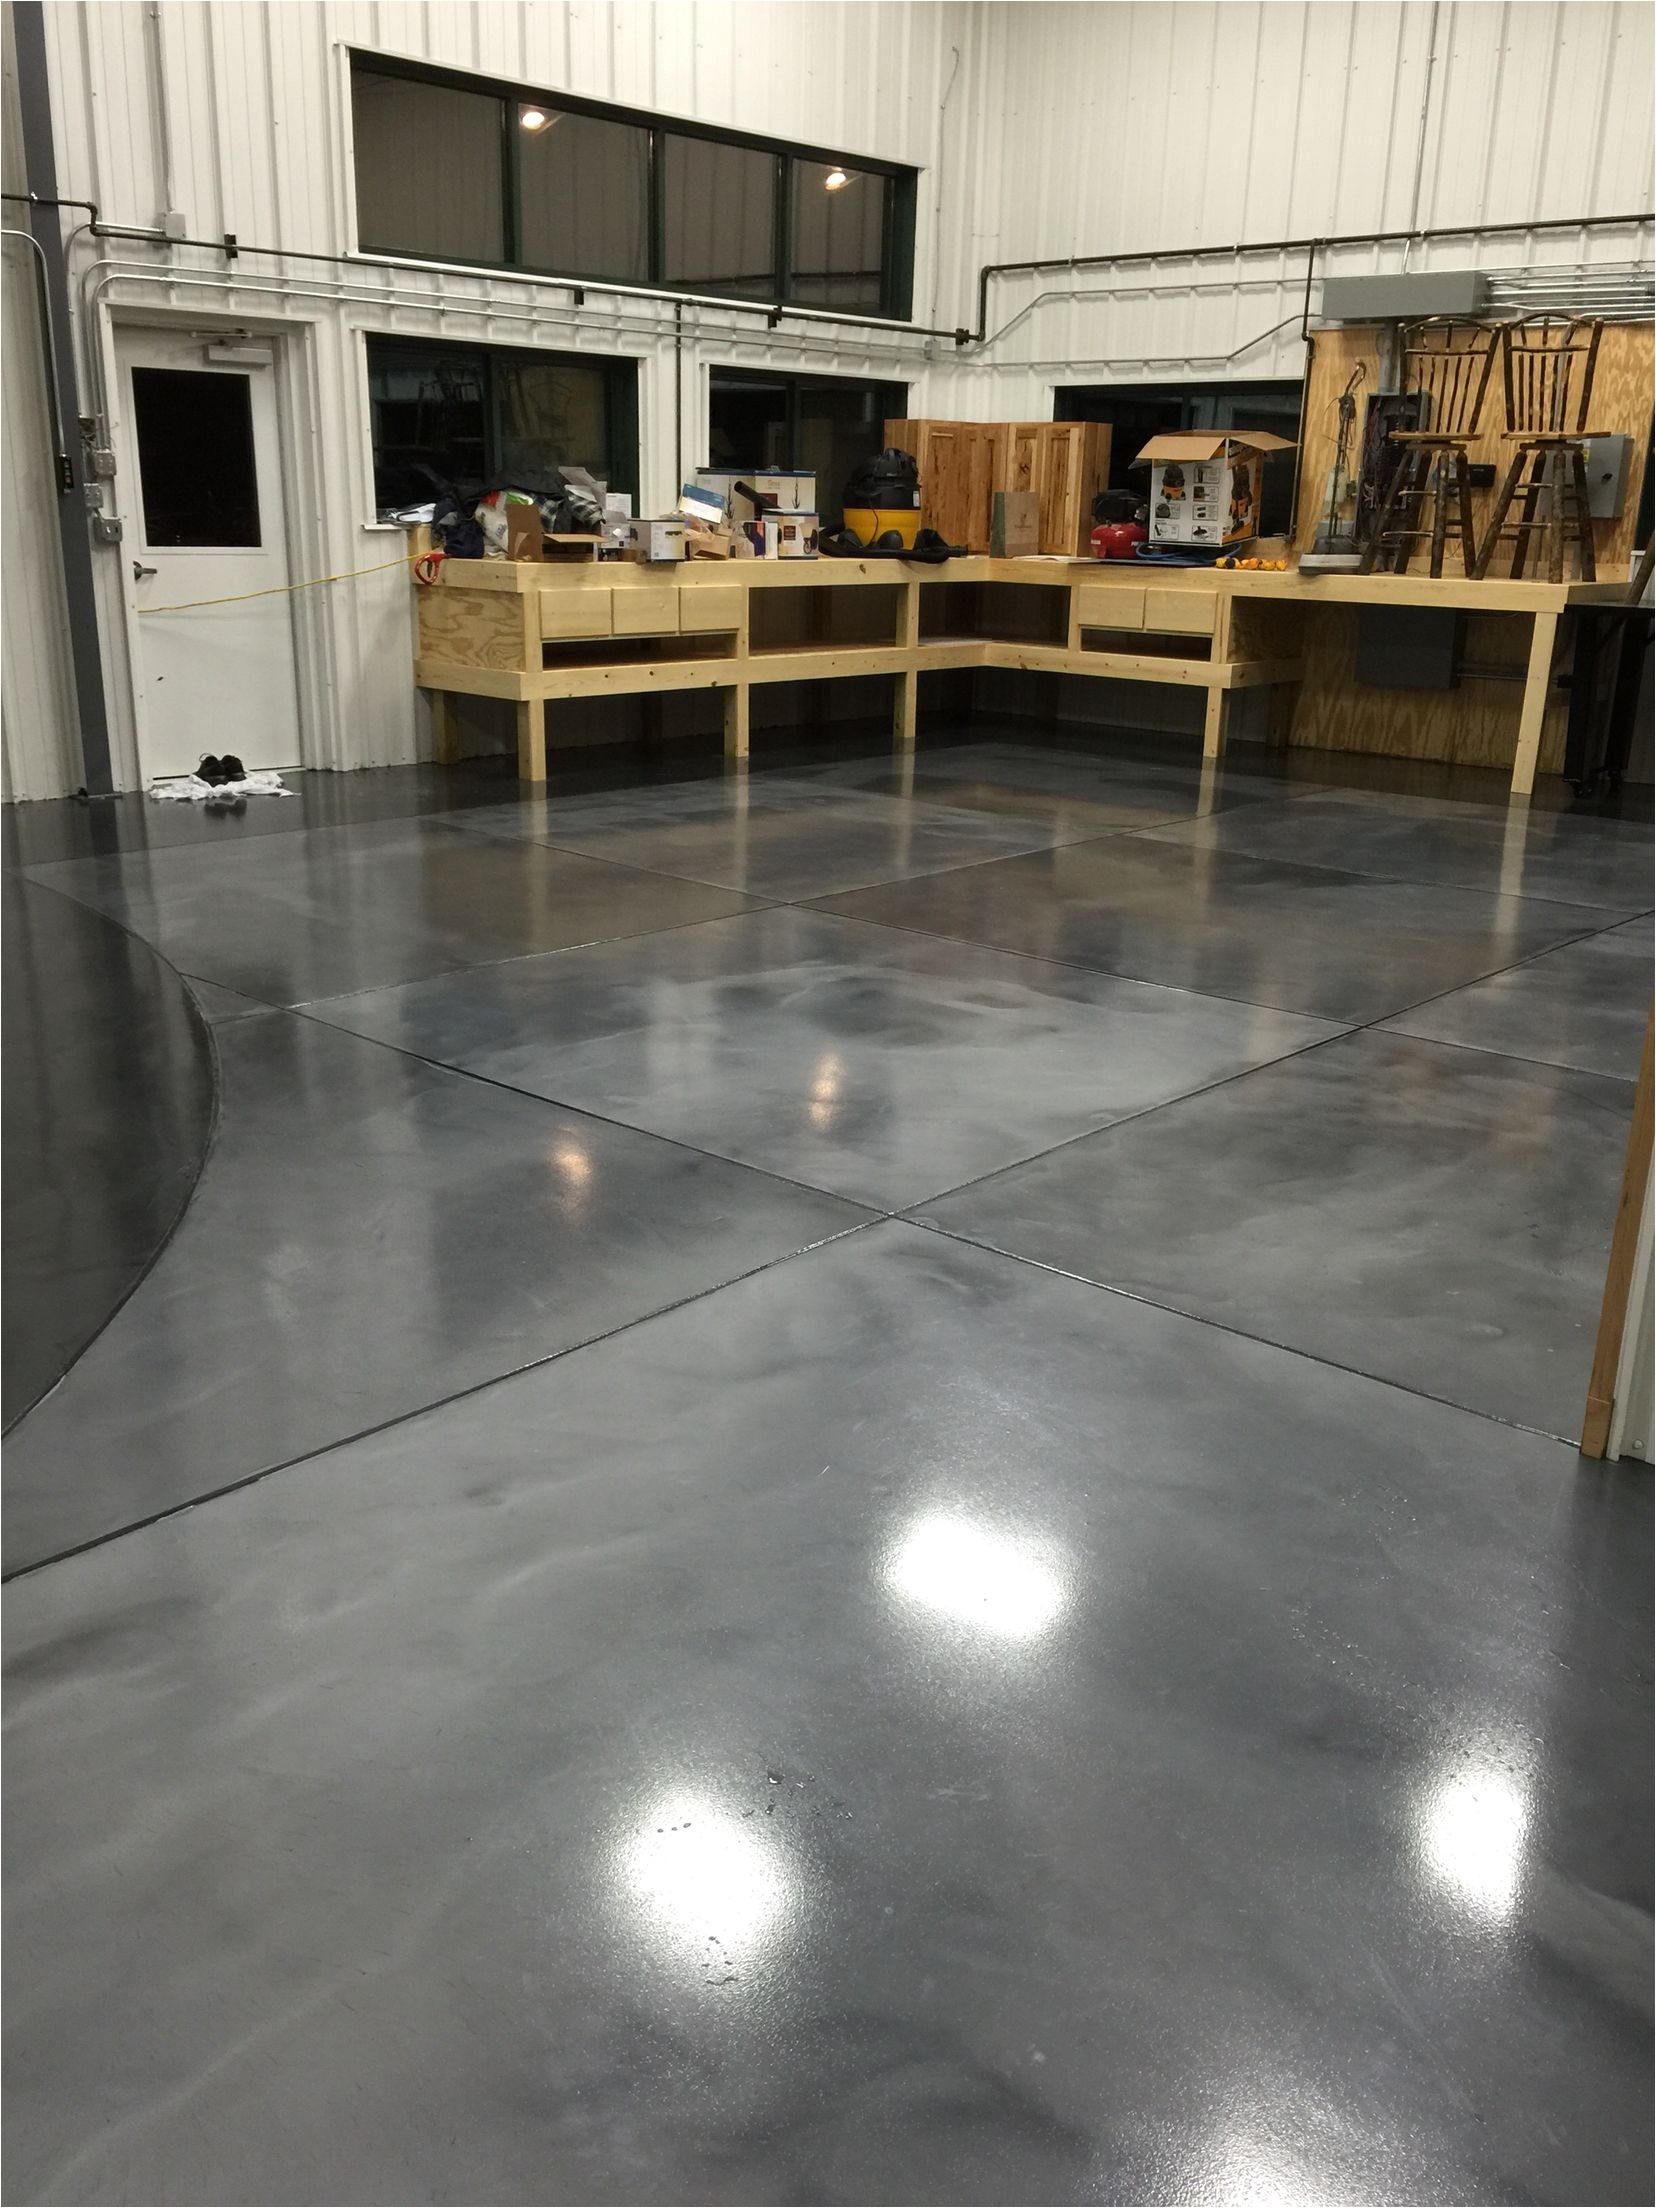 Grey Metallic Epoxy Floor Metallic Epoxy Floor Coatings with Epoxy Grout Lines by Sierra